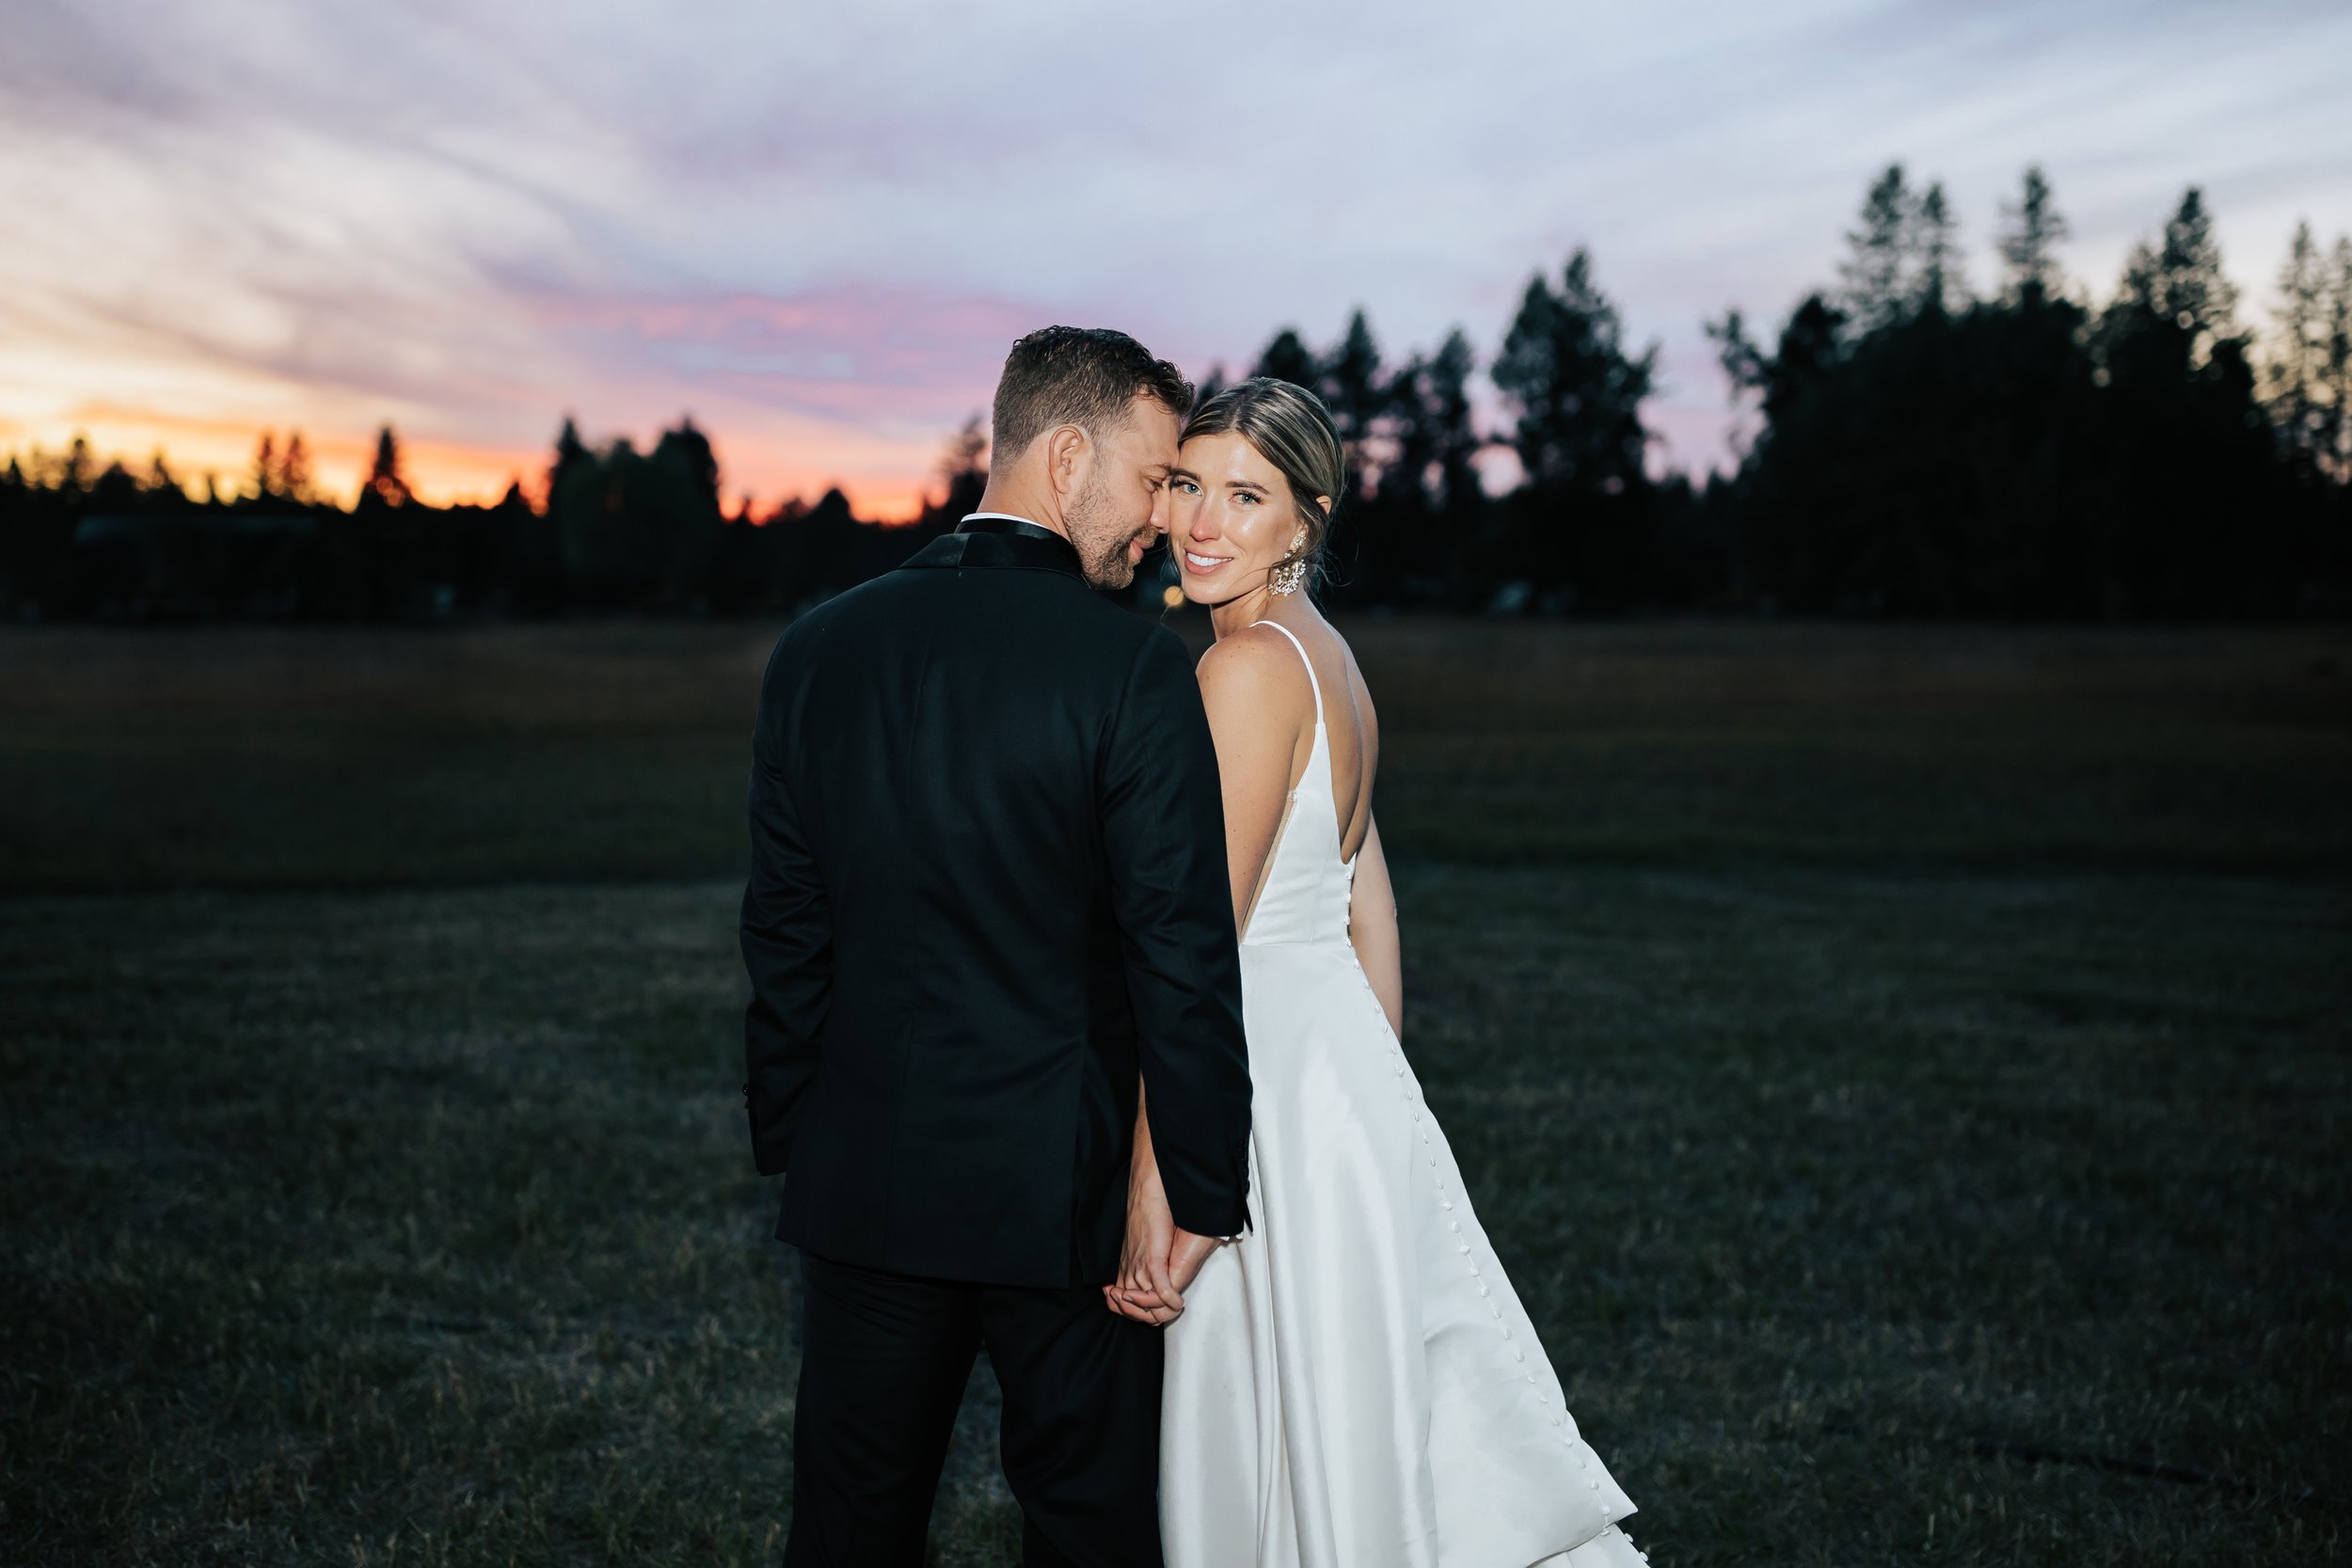  Bride and groom sunset wedding portraits surrounded by beautiful flowers and pine trees. Bride and groom smile at wedding in the forest in Whitefish, Montana. Wedding inspo. Bride is wearing gorgeous large white earrings with a strappy wedding dress